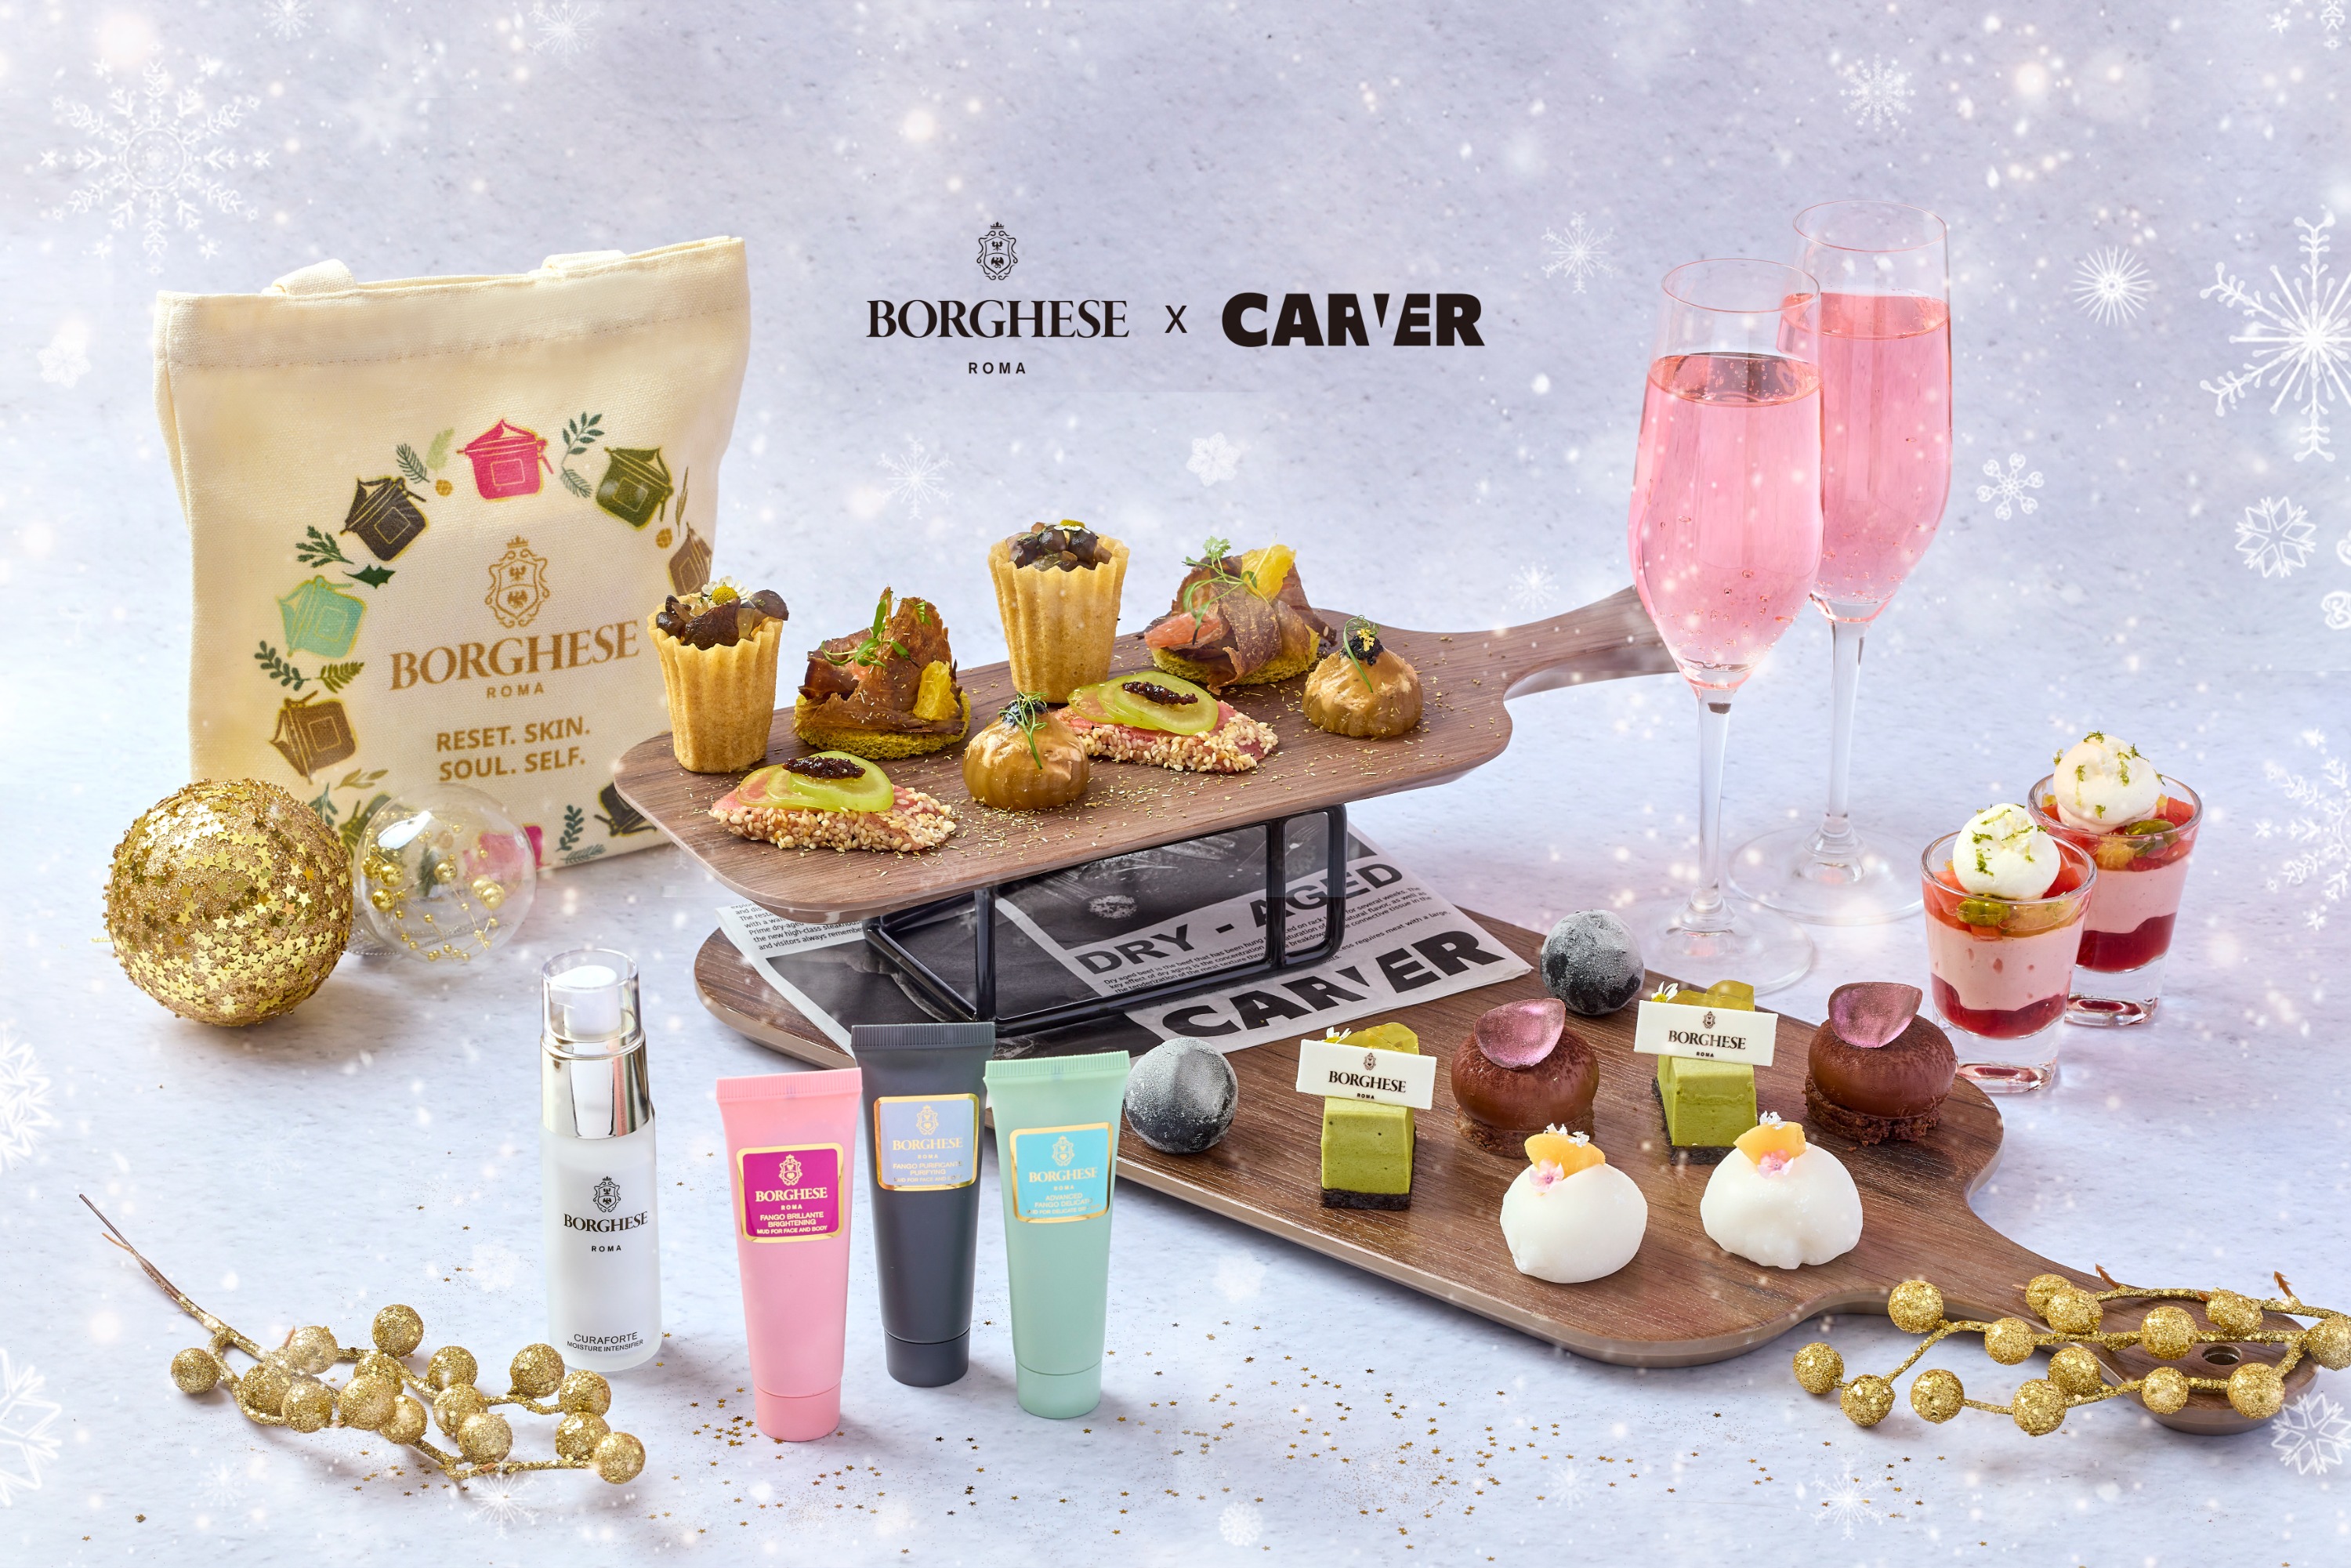 【Christmas Afternoon Tea】Crowne Plaza Hong Kong Causeway Bay | BORGHESE x CARVER "Dolce Far Niente" Christmas Afternoon Tea Set